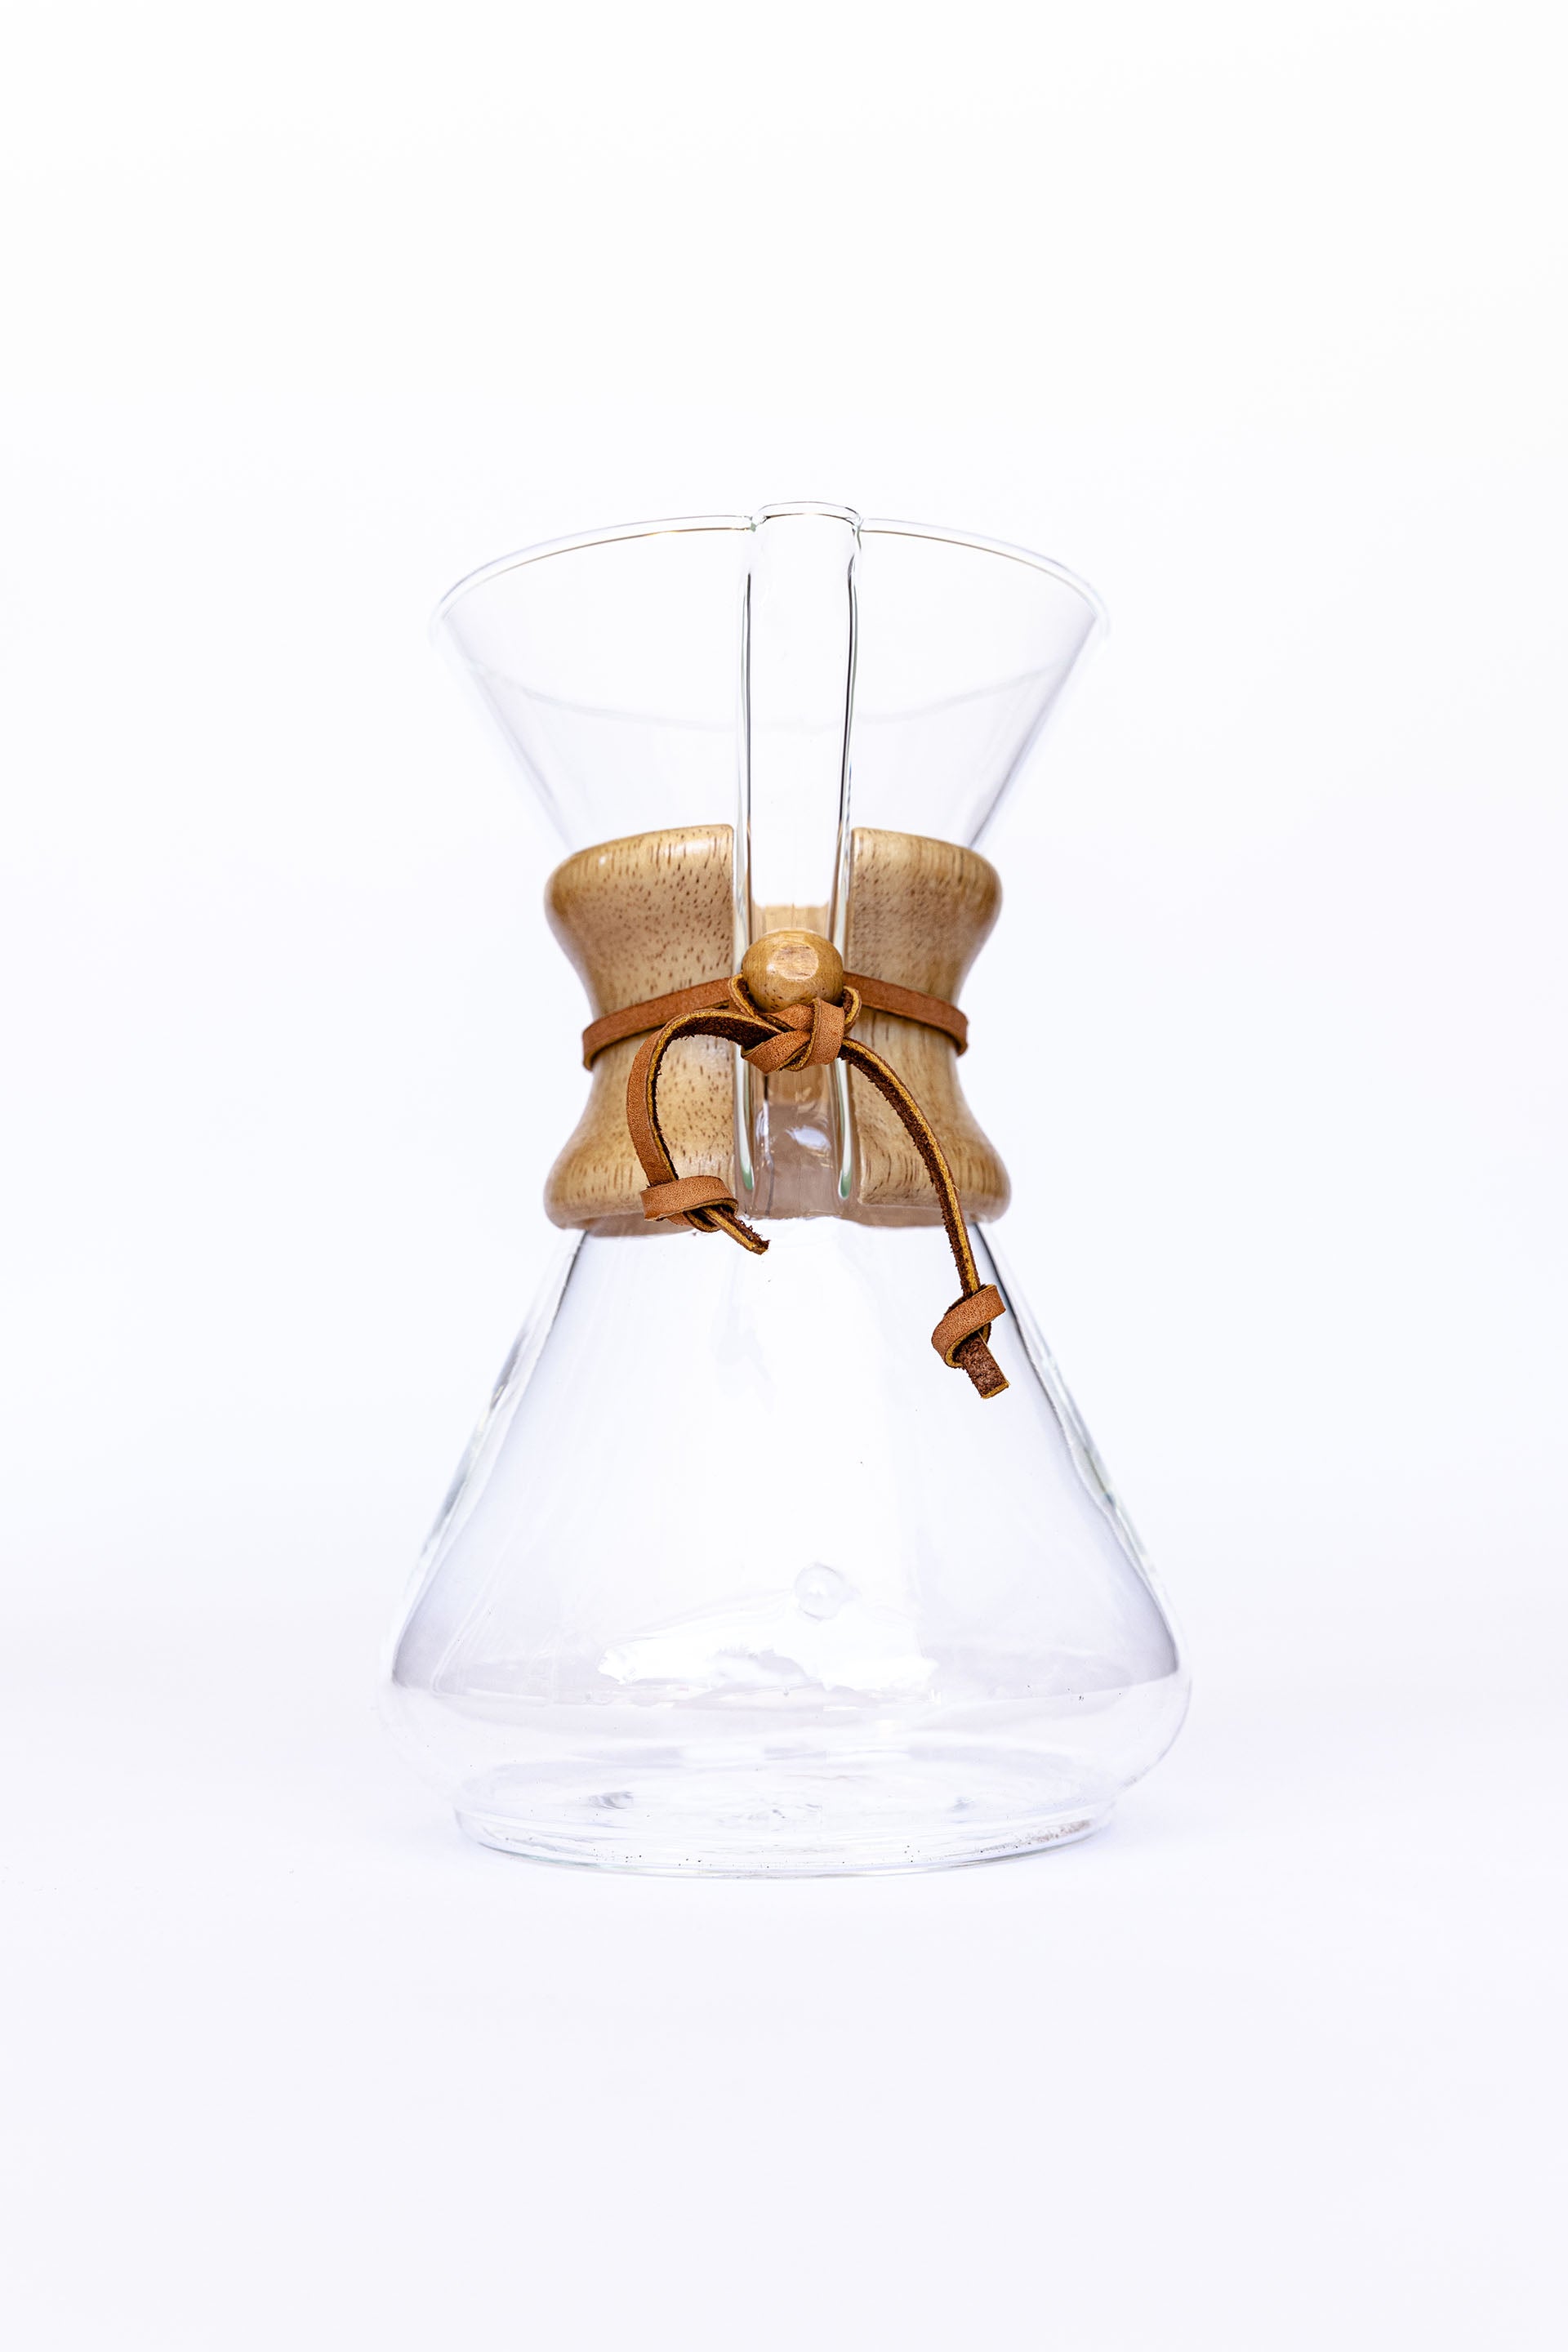 How to Use Chemex Coffee Makers, Trade Coffee